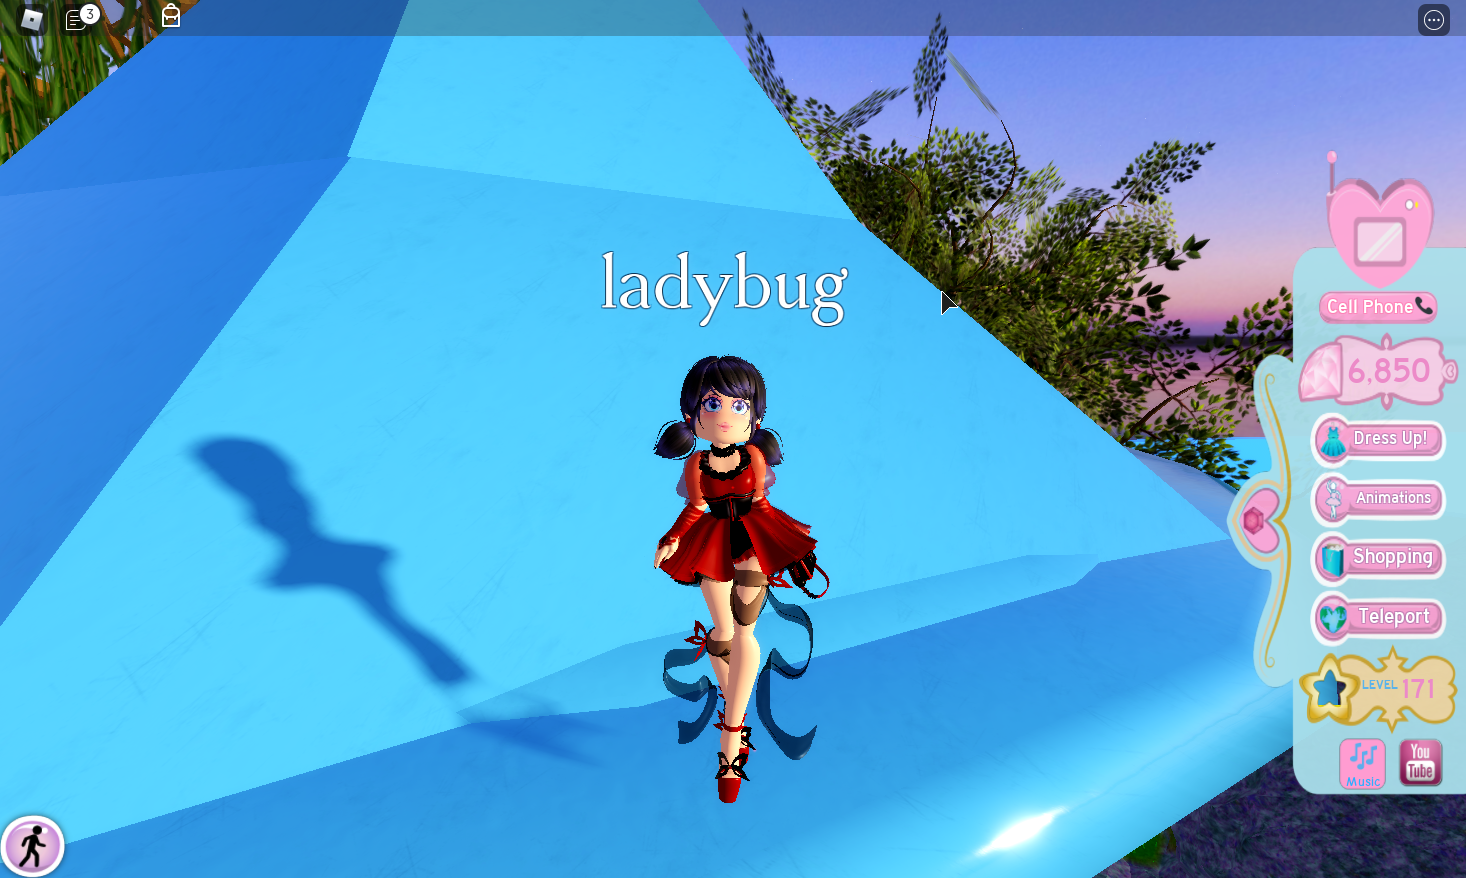 So I Dressed Up As Ladybug On Roblox Royale High Fandom - how do you level up in royale high roblox